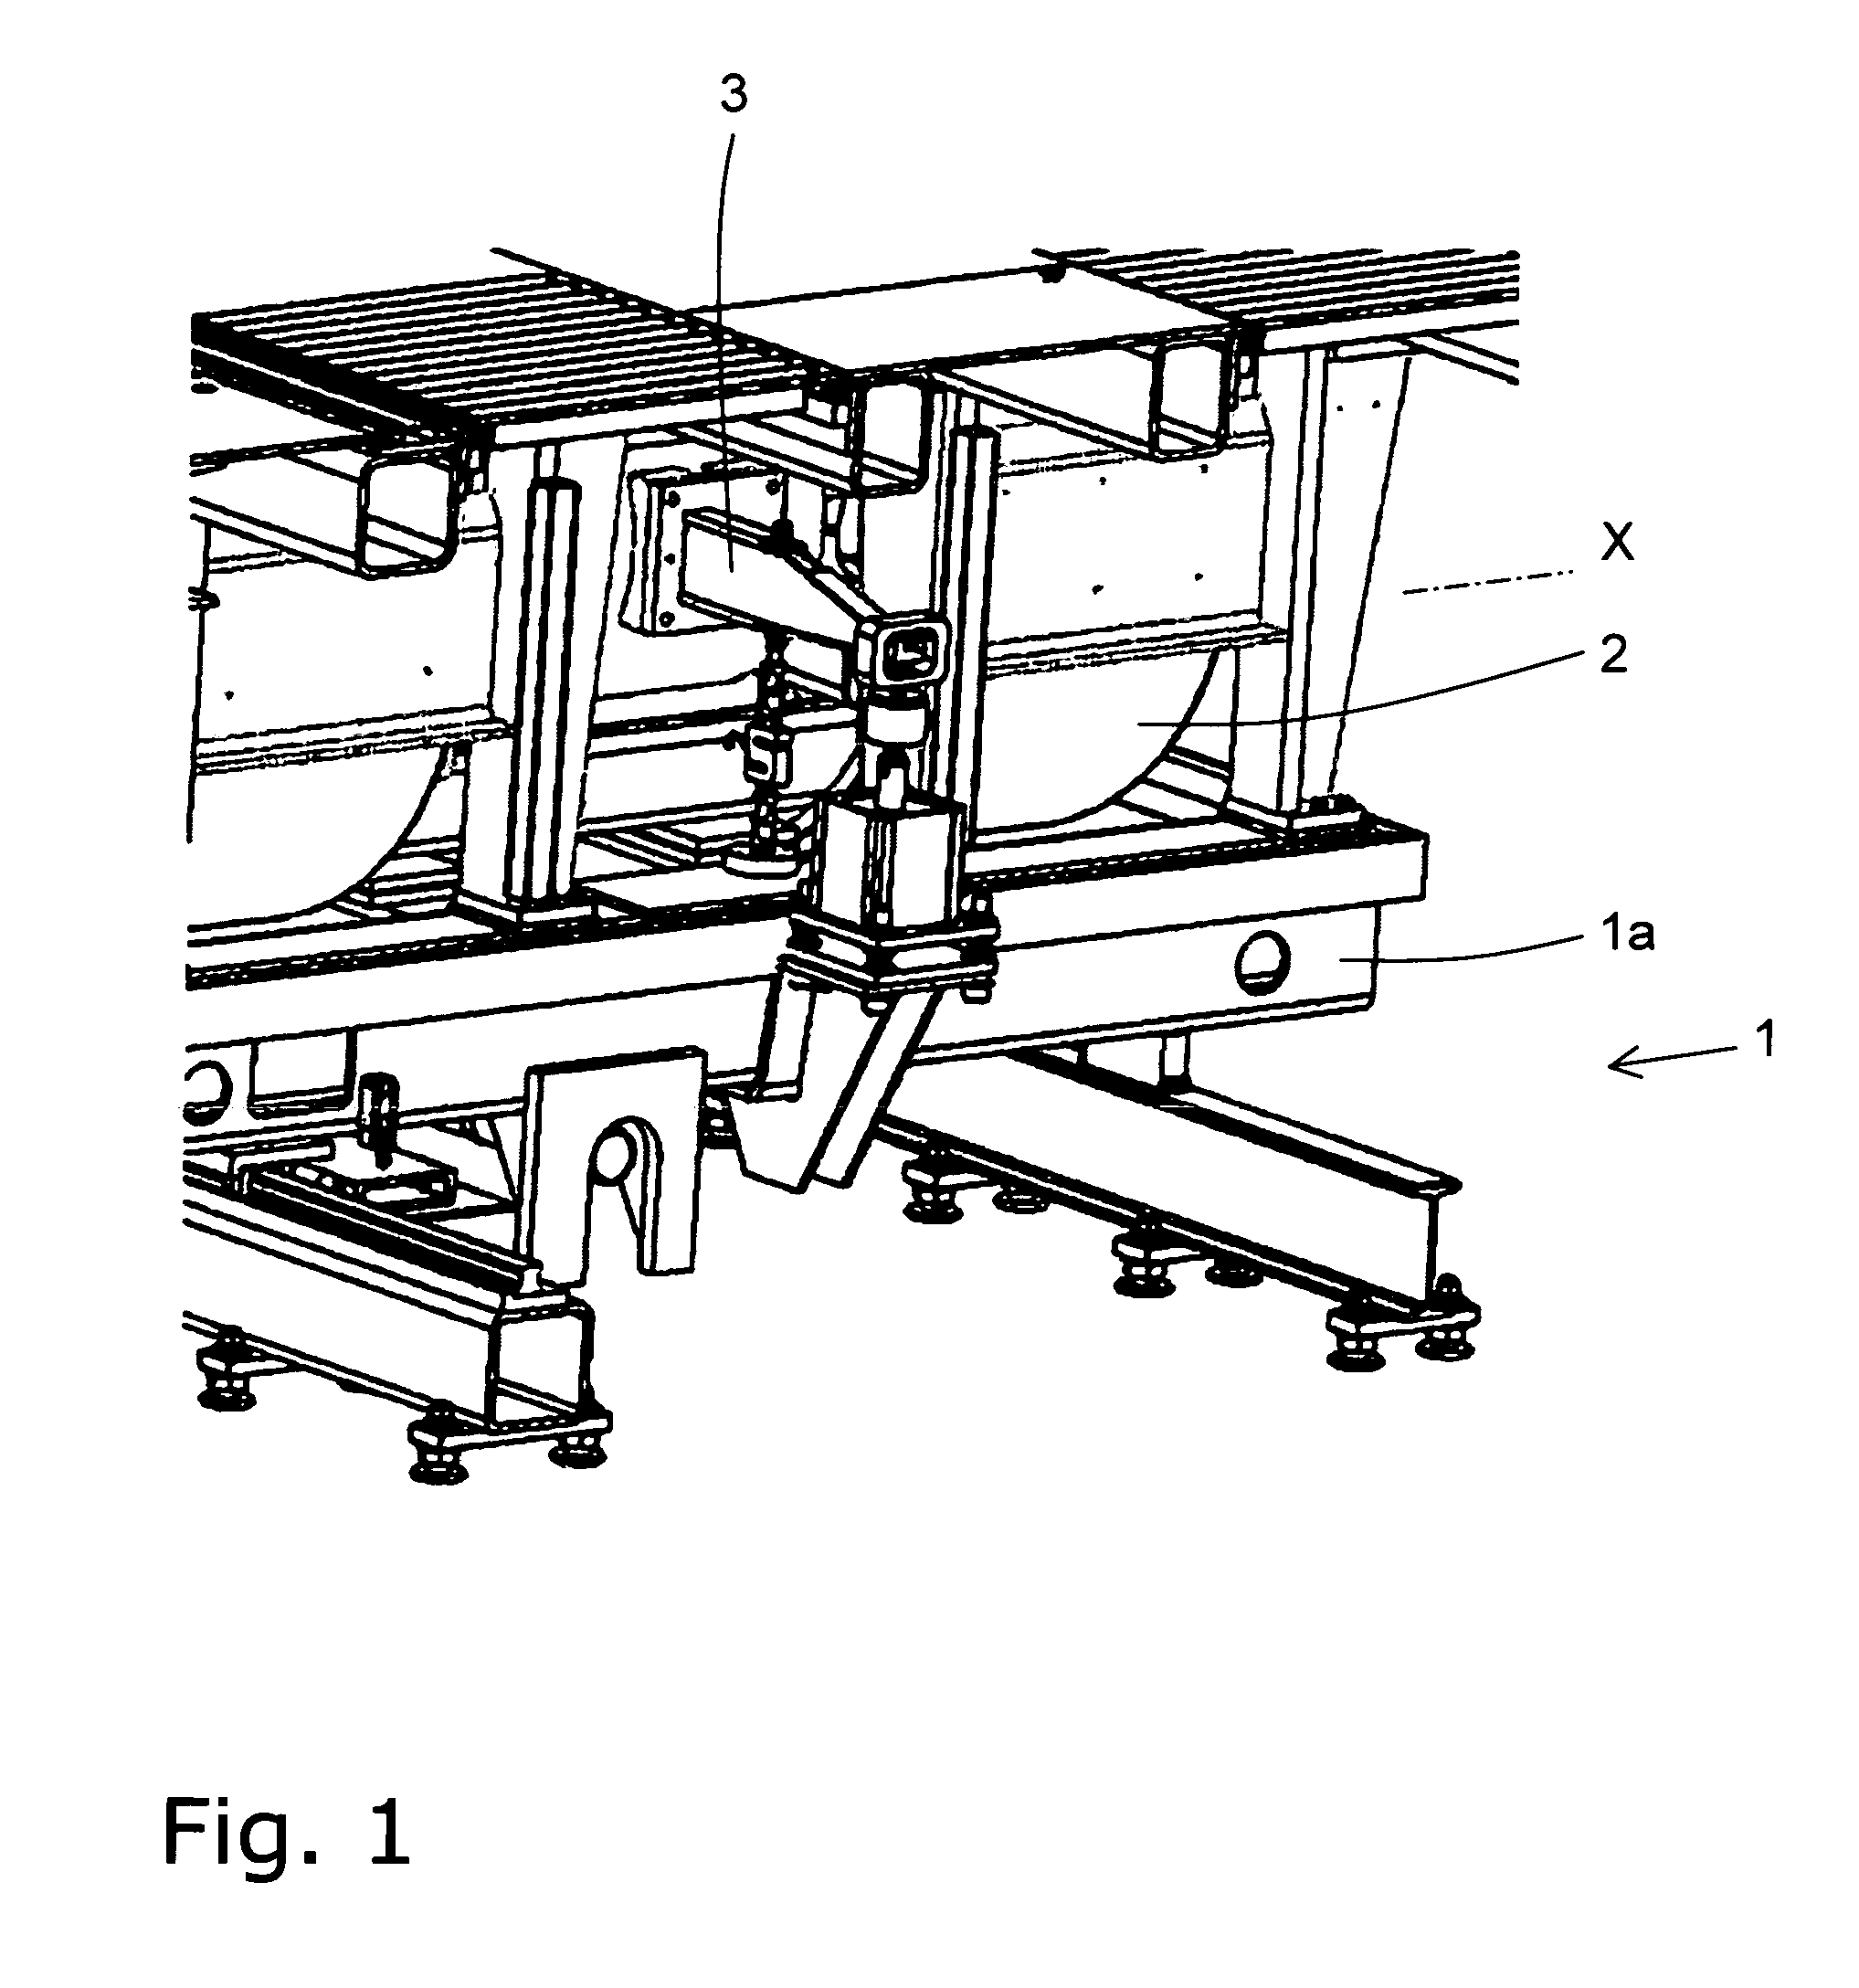 Test Stand with an Apparatus for Calibrating a Force-Measuring Device